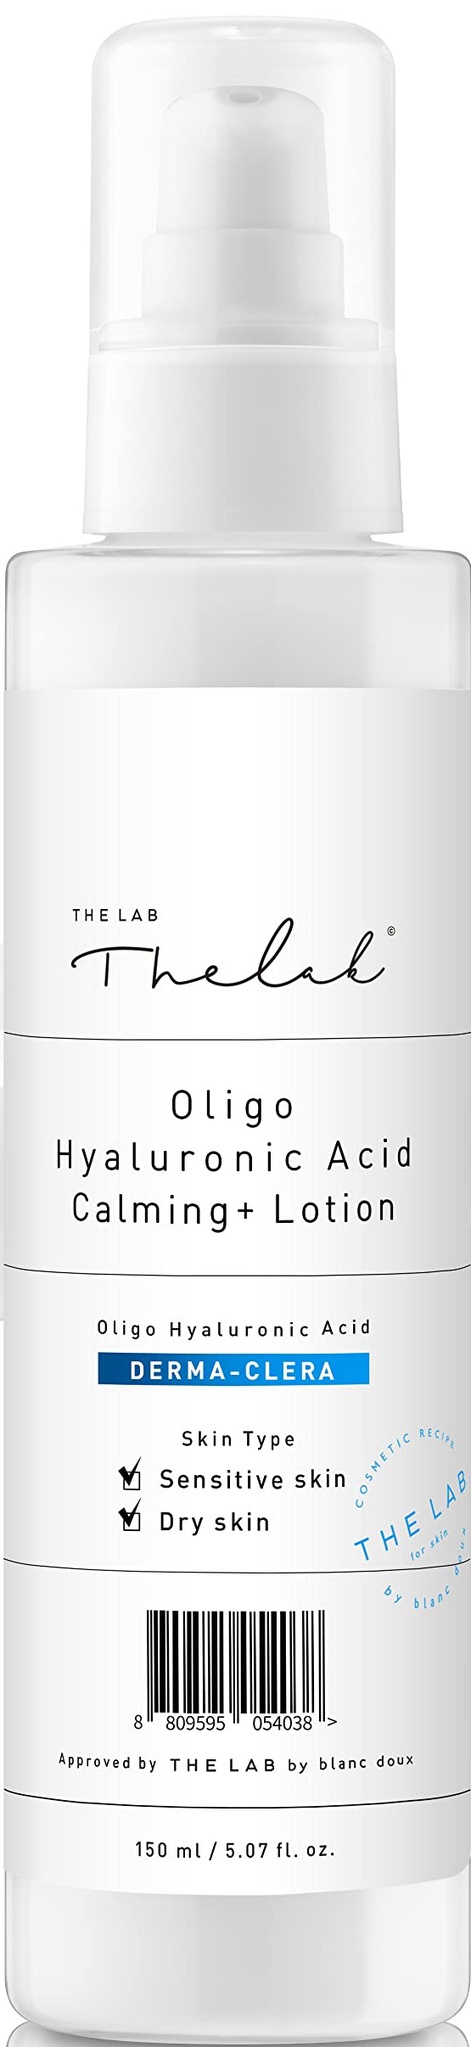 THE LAB by blanc doux Oligo Hyaluronic Acid Calming+ Lotion